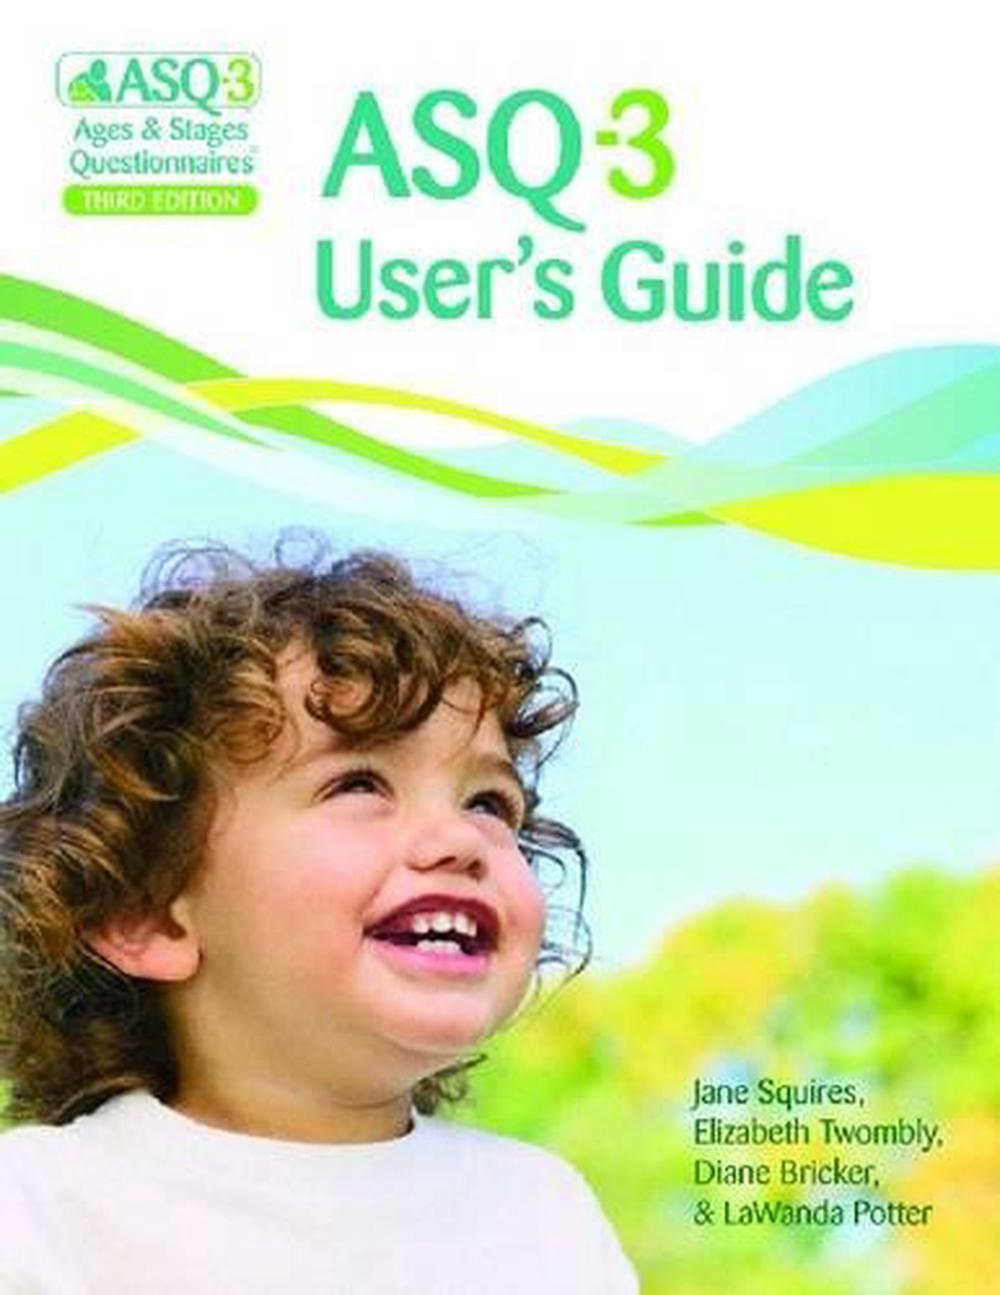 ASQ-3 User's Guide: Ages & Stages Questionnaires by Jane ...